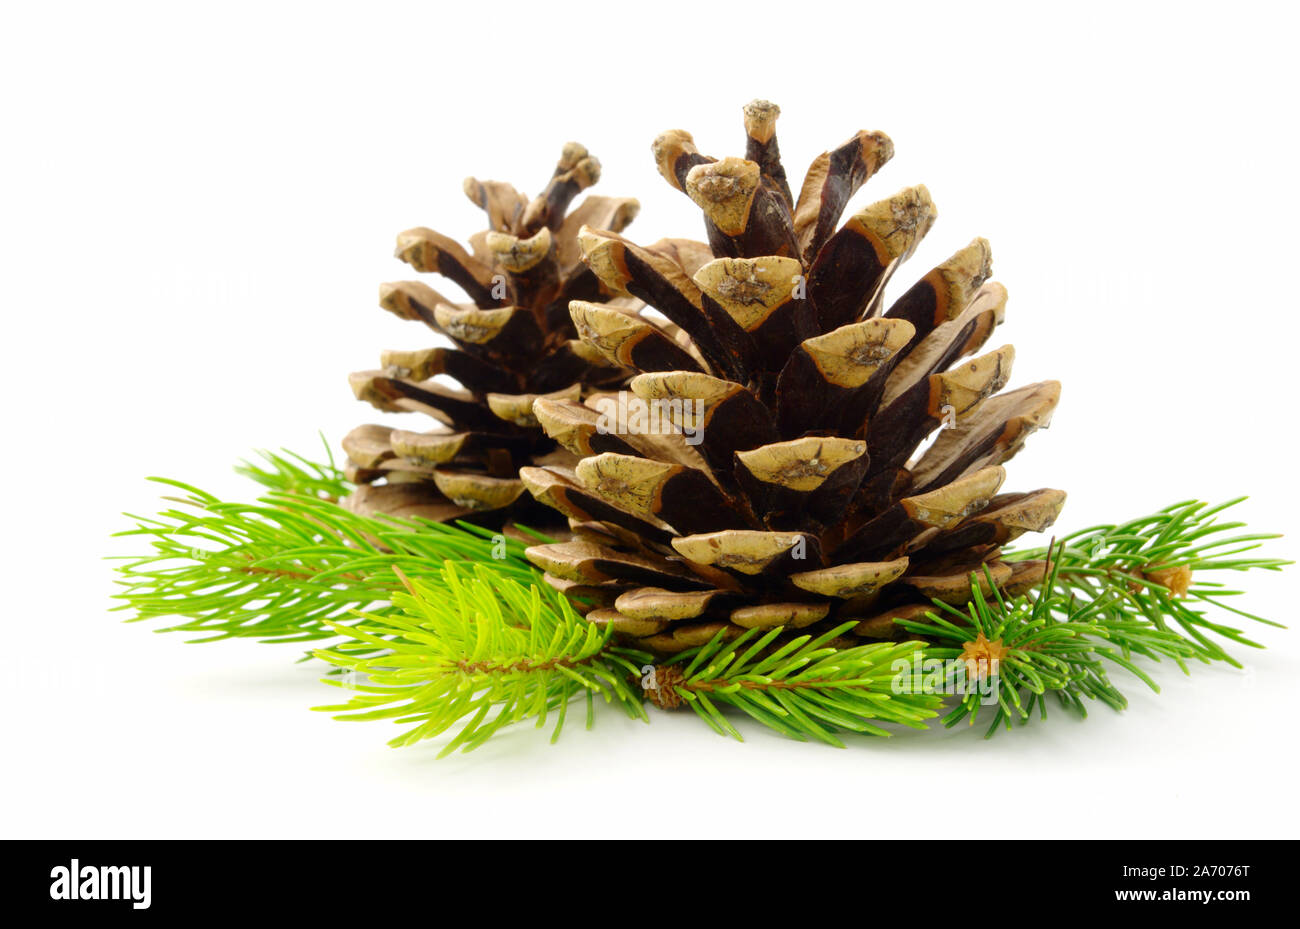 cone and pine branches on a white background Stock Photo